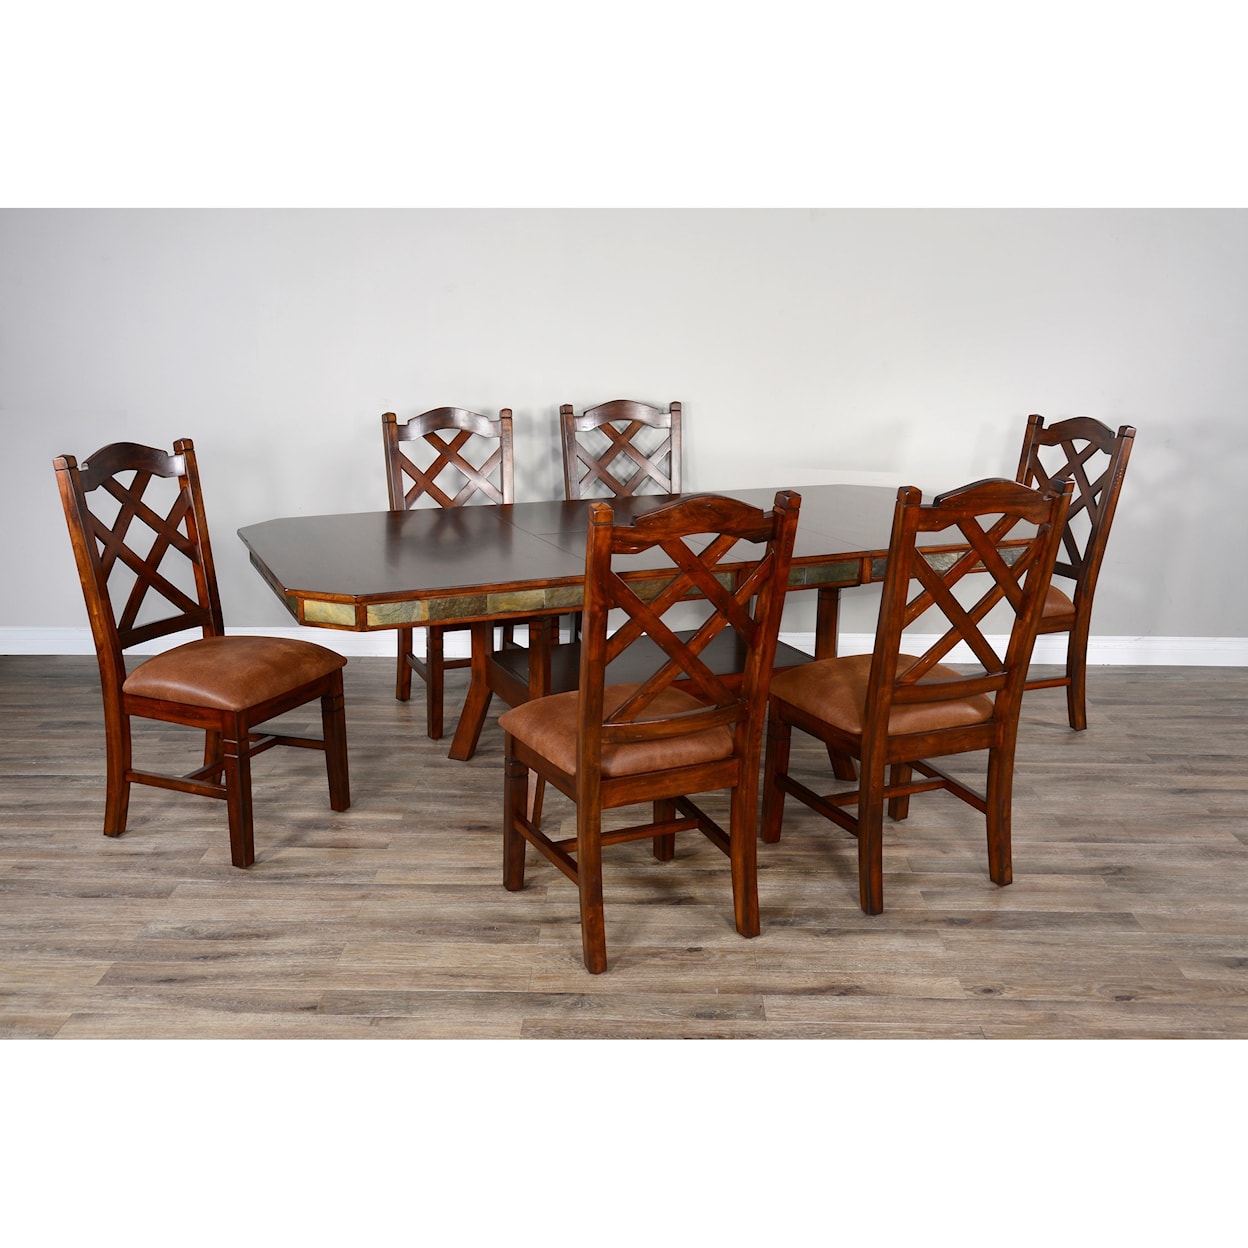 Sunny Designs Santa Fe 2 Dining Set with 6 Side Chairs